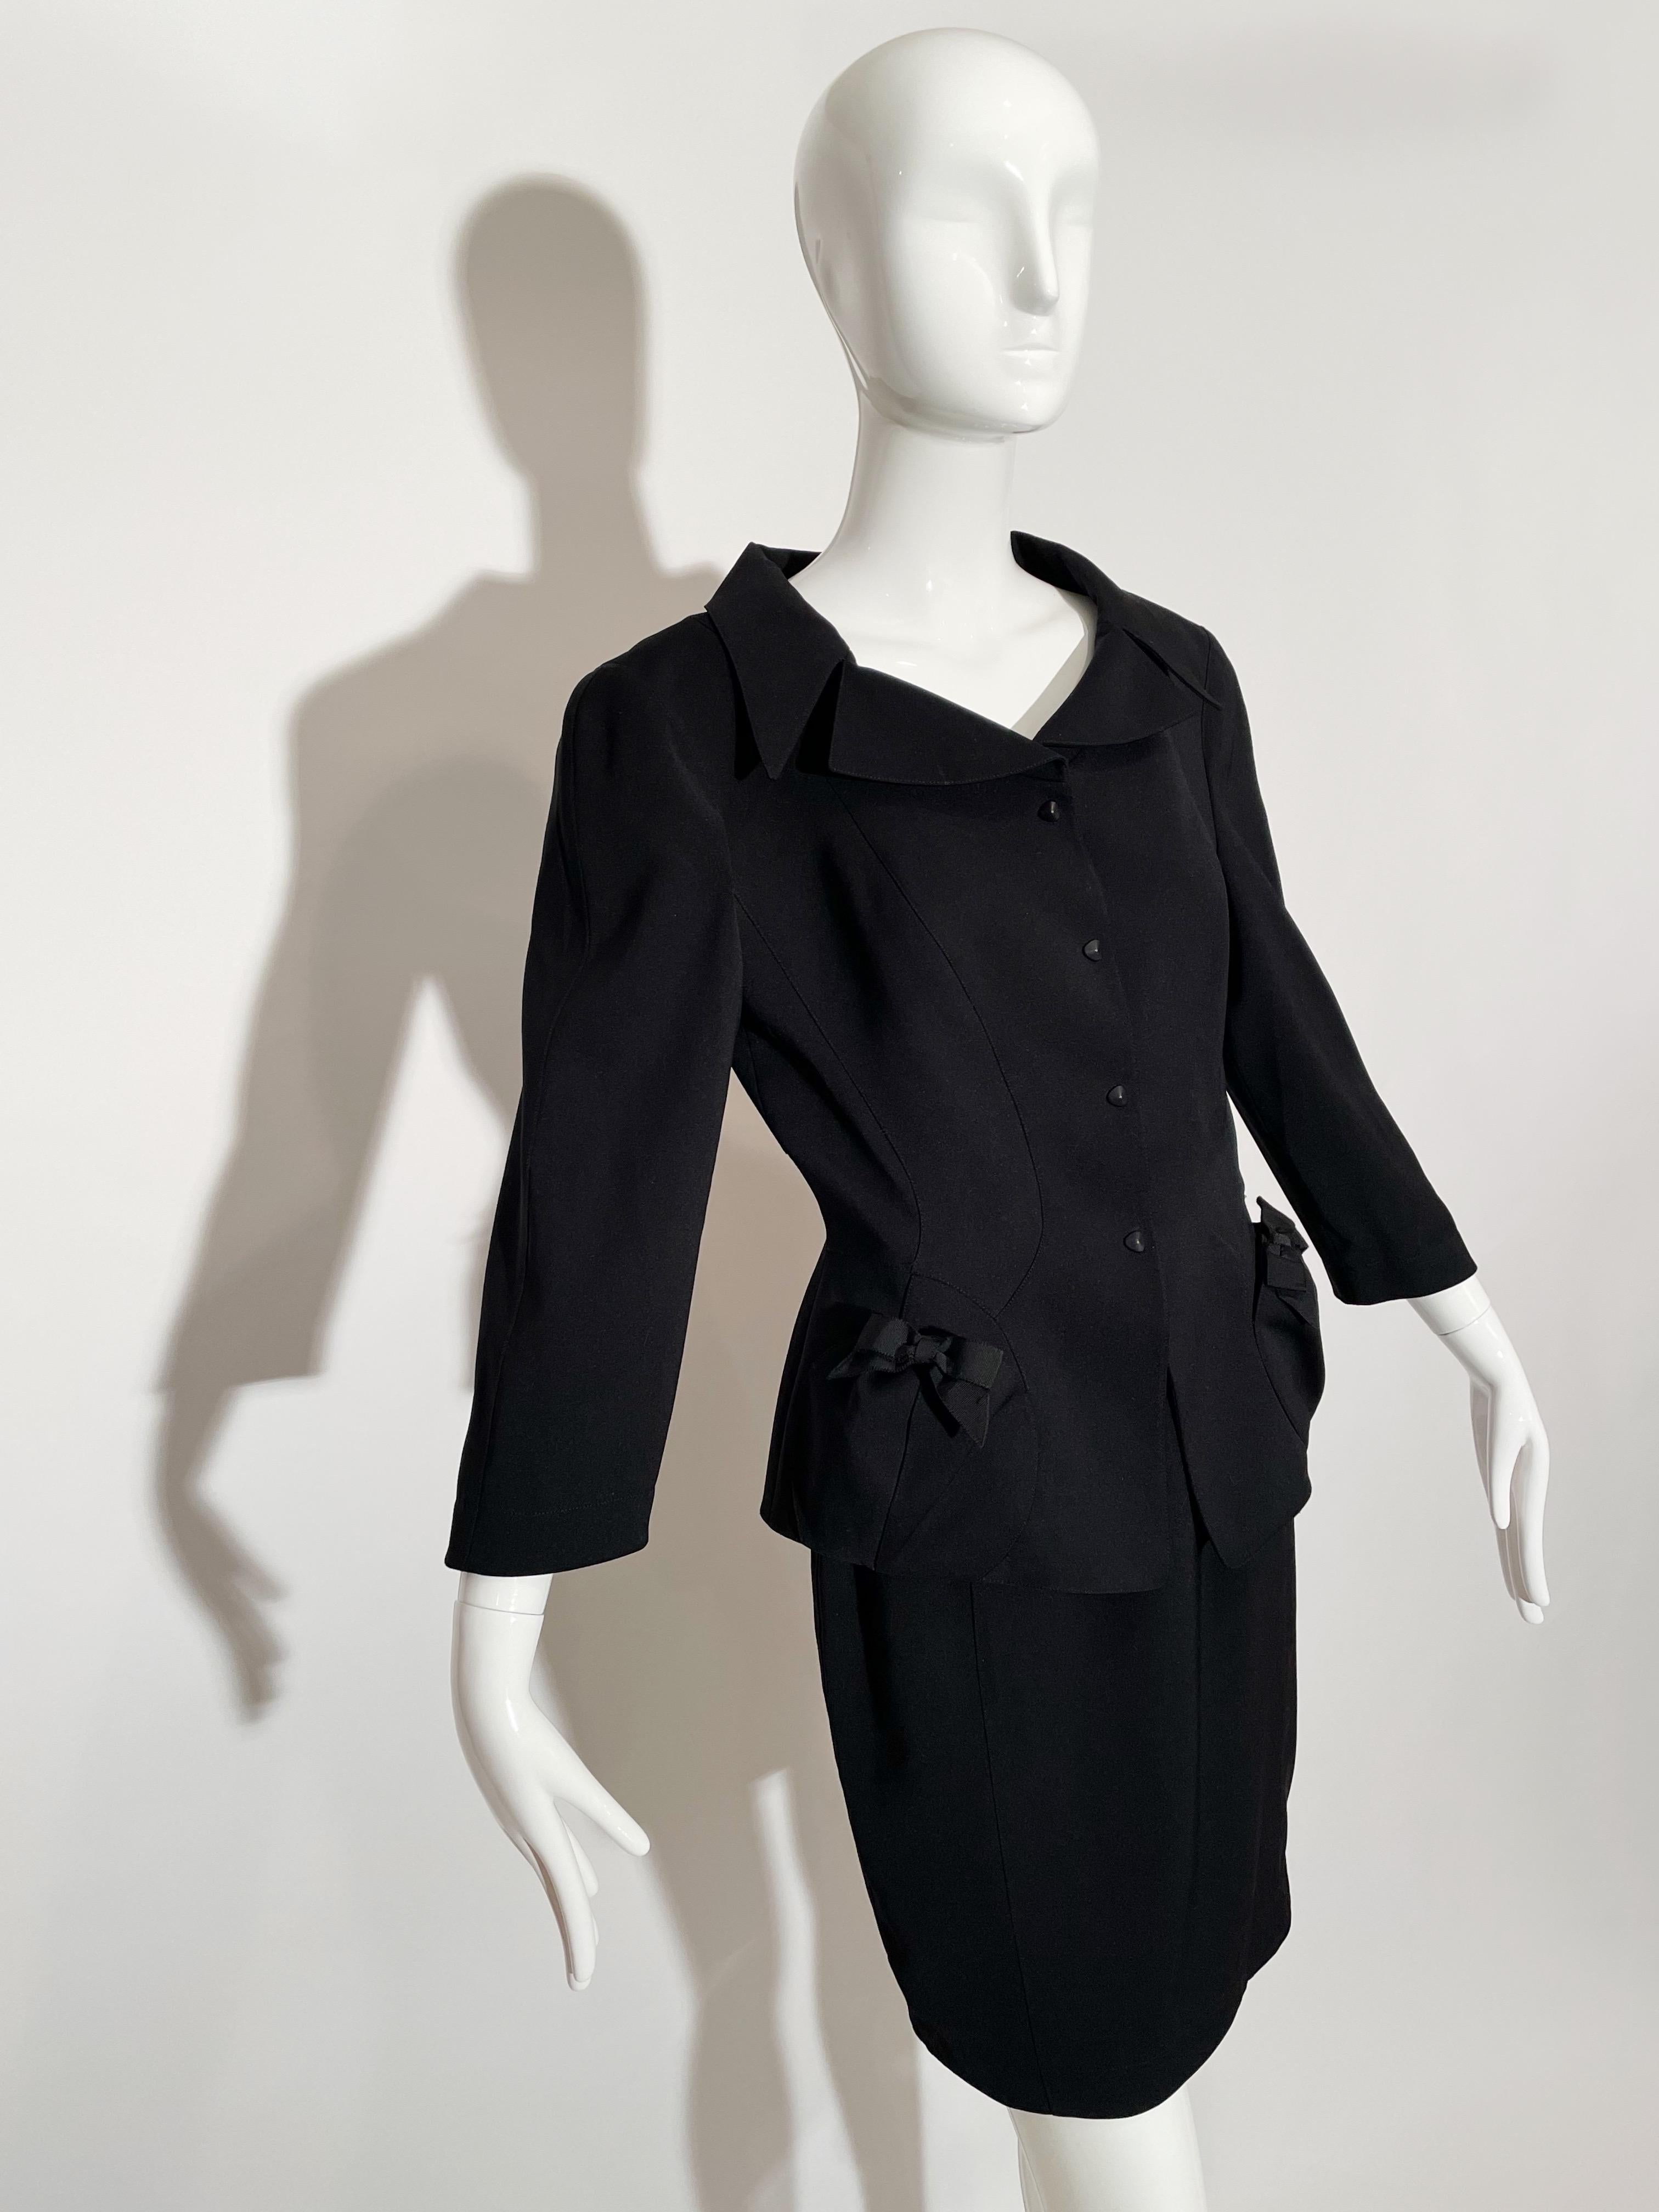 Black skirt suit. Bow detail on pockets. Front Pockets on waist of blazer. Button closures at front and wrist. Lapel collar. 3/4 length sleeves. Rear zipper closure on skirt. Rear pleat detail on skirt. Polyester. Lined. Made in France.

*Condition: